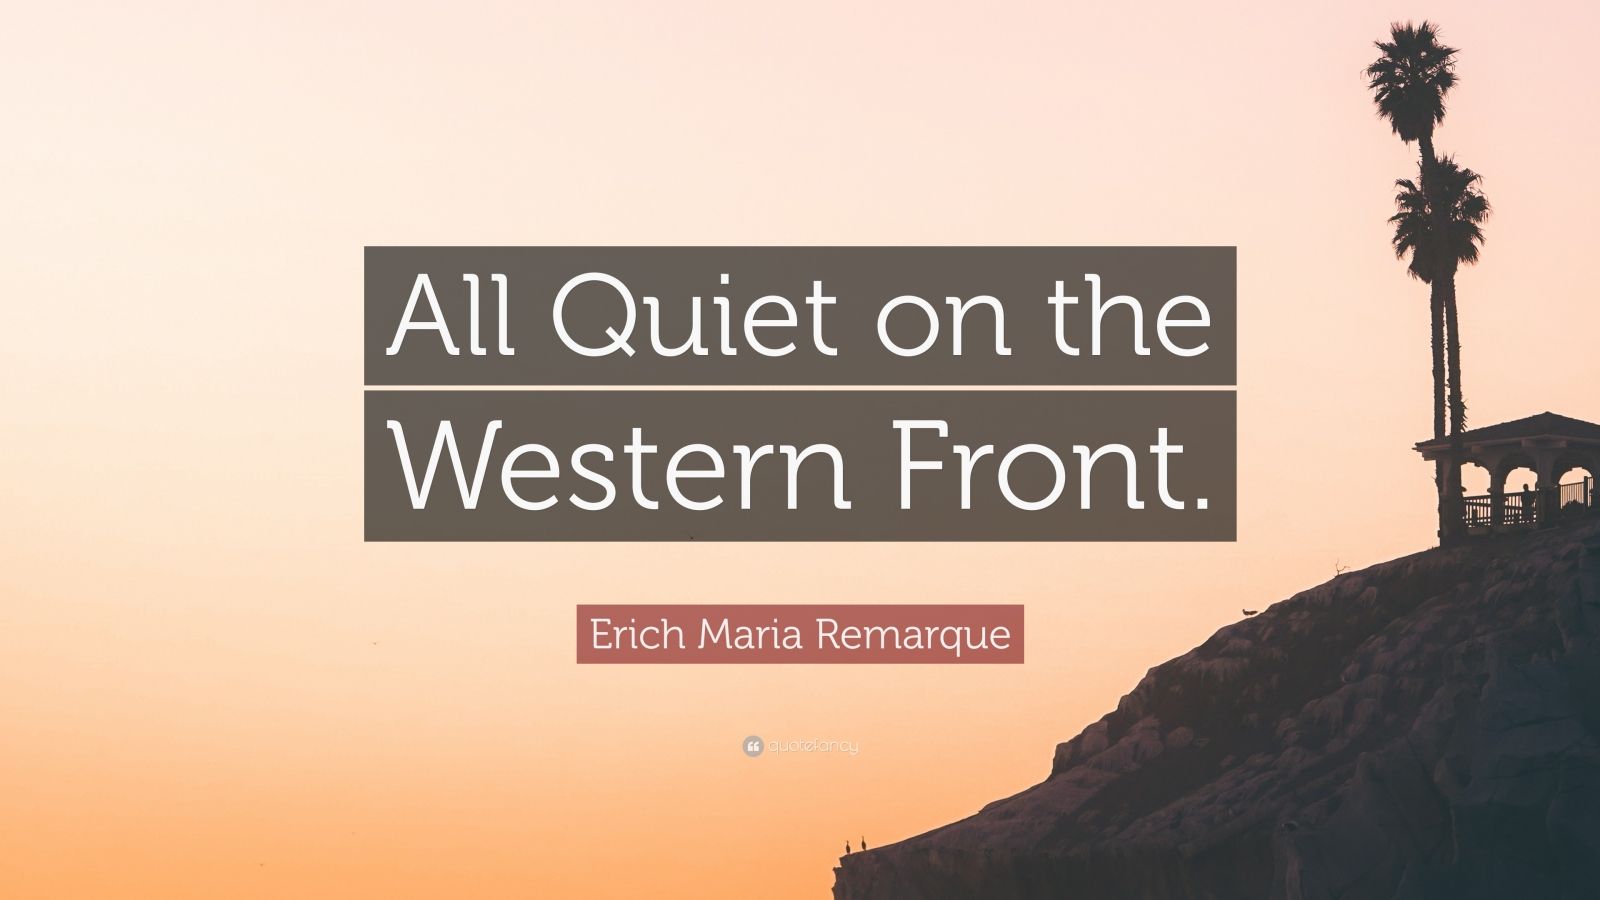 all quiet on the western front by erich maria remarque